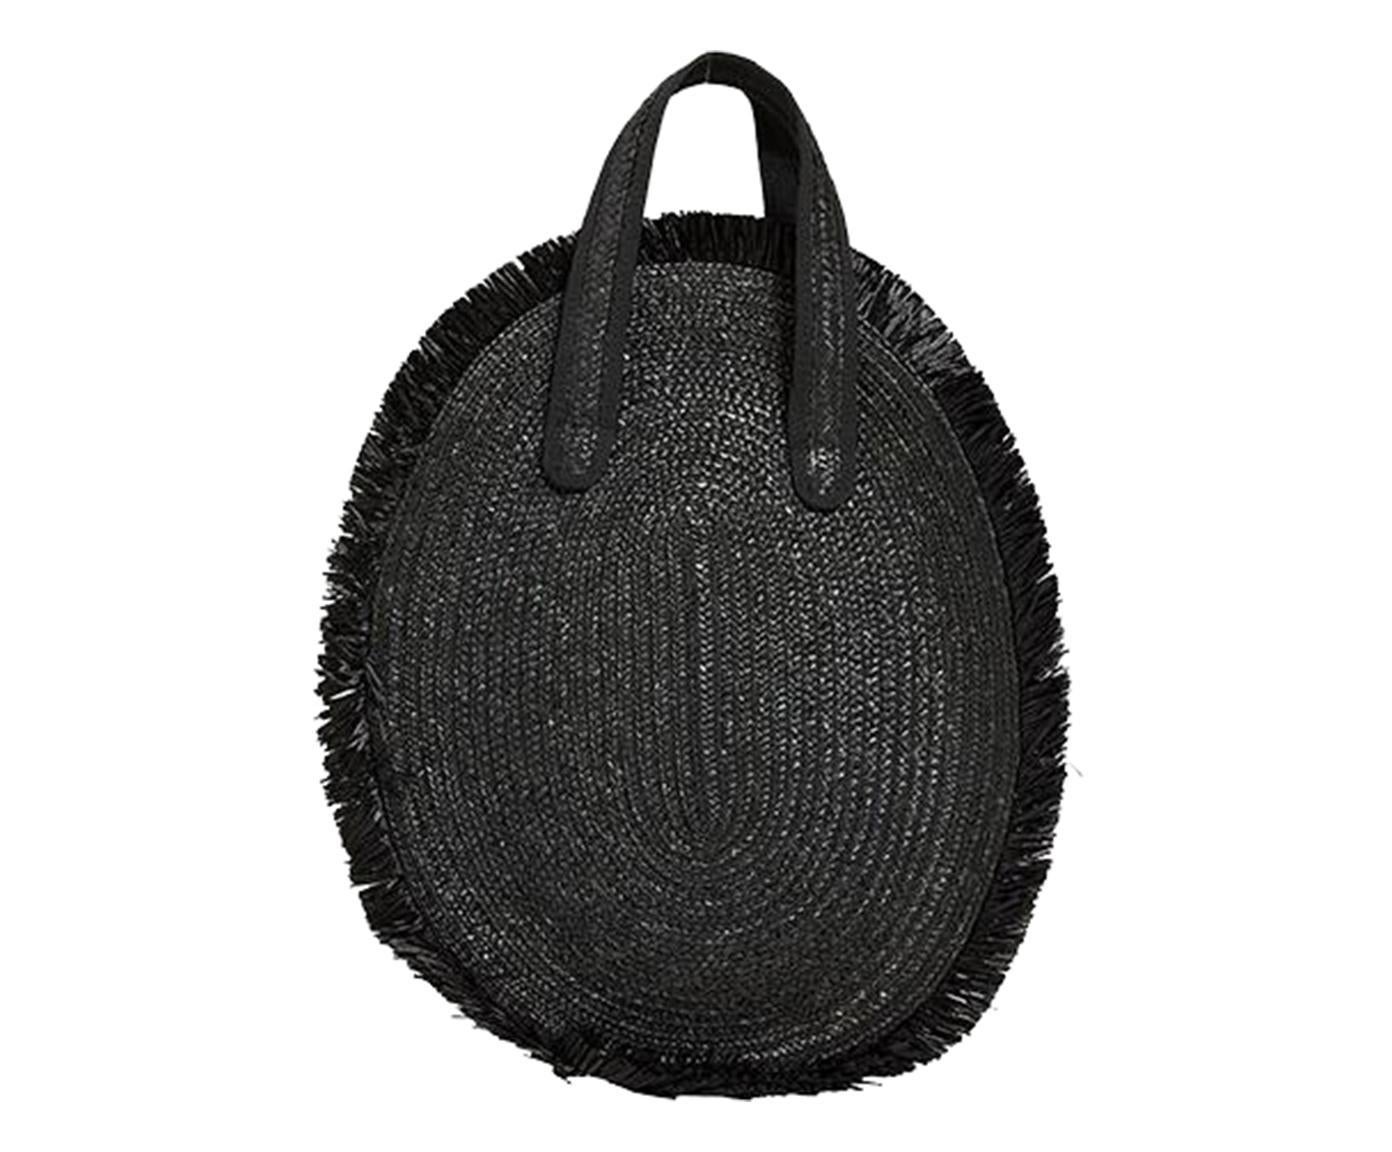 Audrey black rafia handbag 
. Straw bag with fringes details.

. Vintage lining in printed cotton with nappa leather pocket.

. Handle in woven straw.

Composition: Nappa leather, straw and cotton

Colours: black

Height: 34cm

Width: 20cm 

Depth: